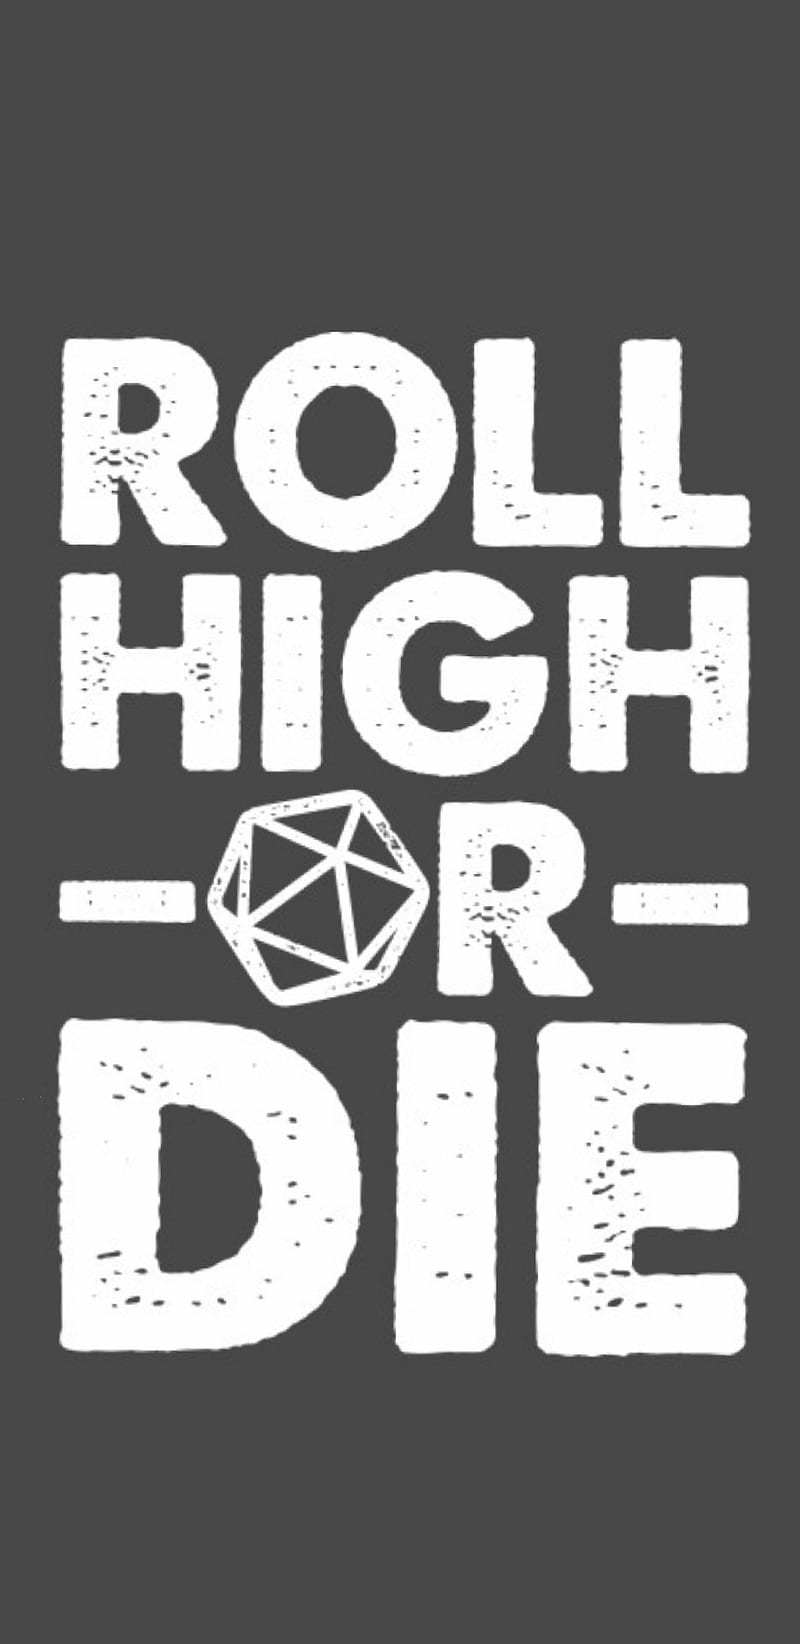 Roll High or Die, critical, dice, dm, dnd, dragons, dungeons, rpg, tabletop, HD phone wallpaper